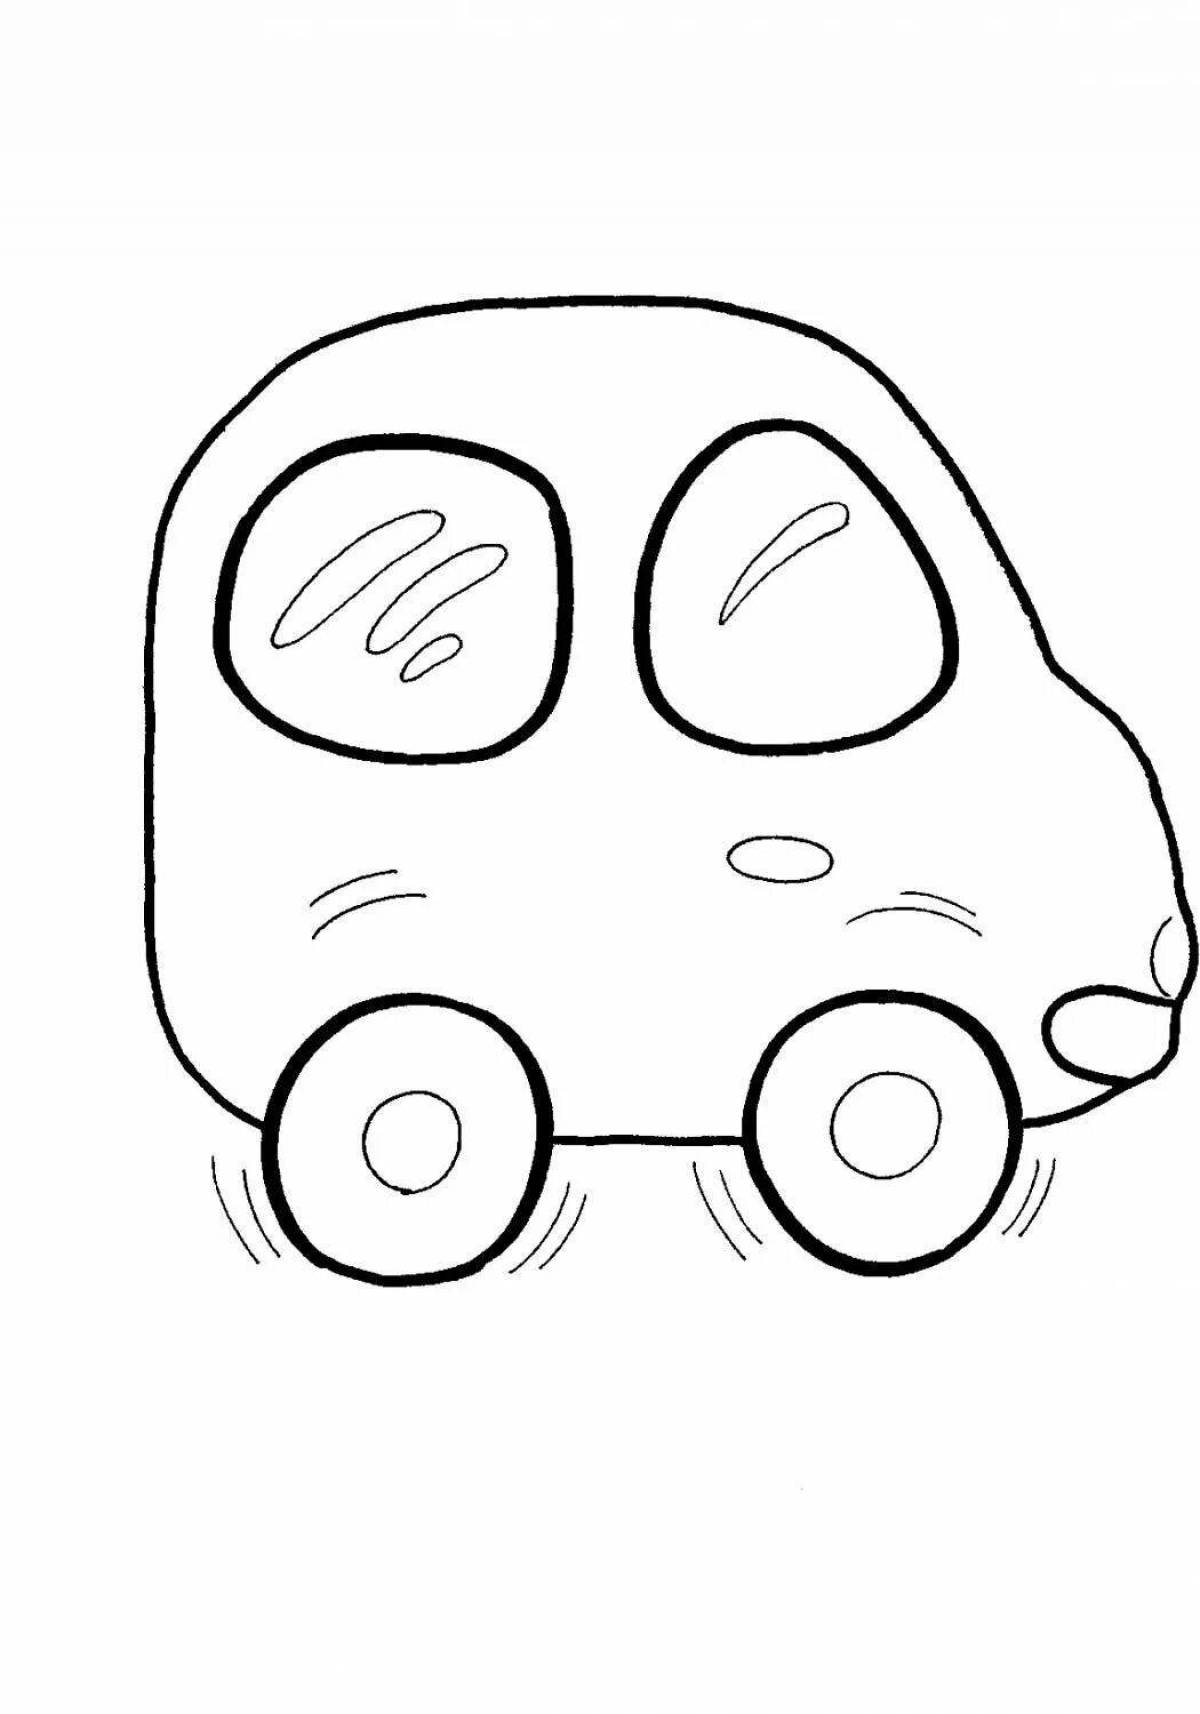 Colorful car coloring page